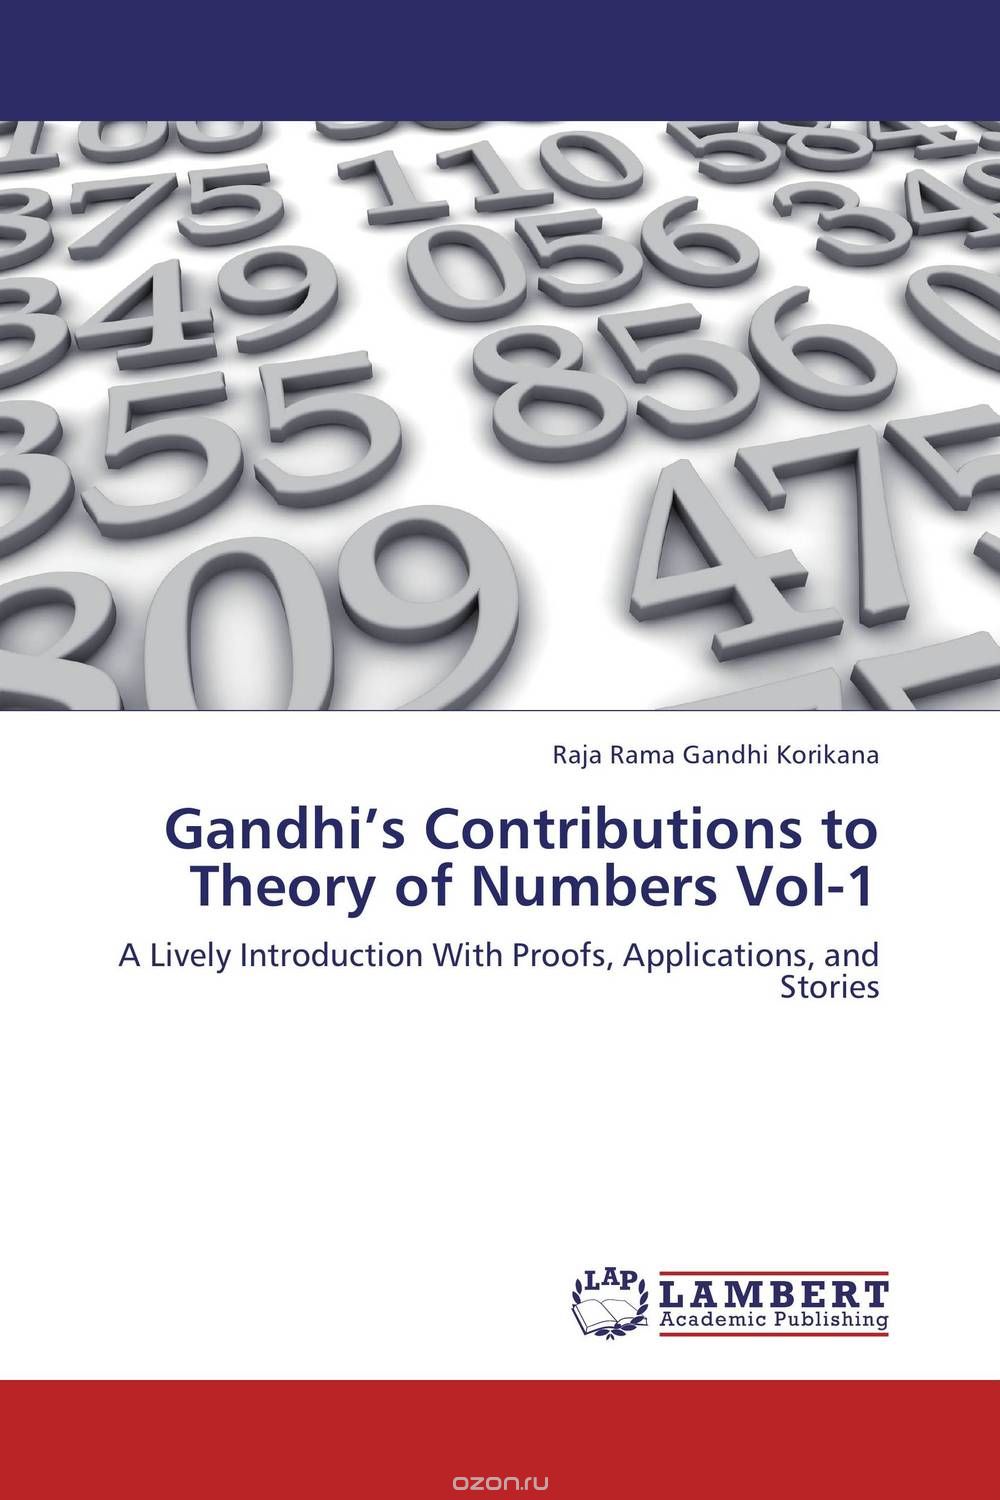 Gandhi’s Contributions to Theory of Numbers Vol-1